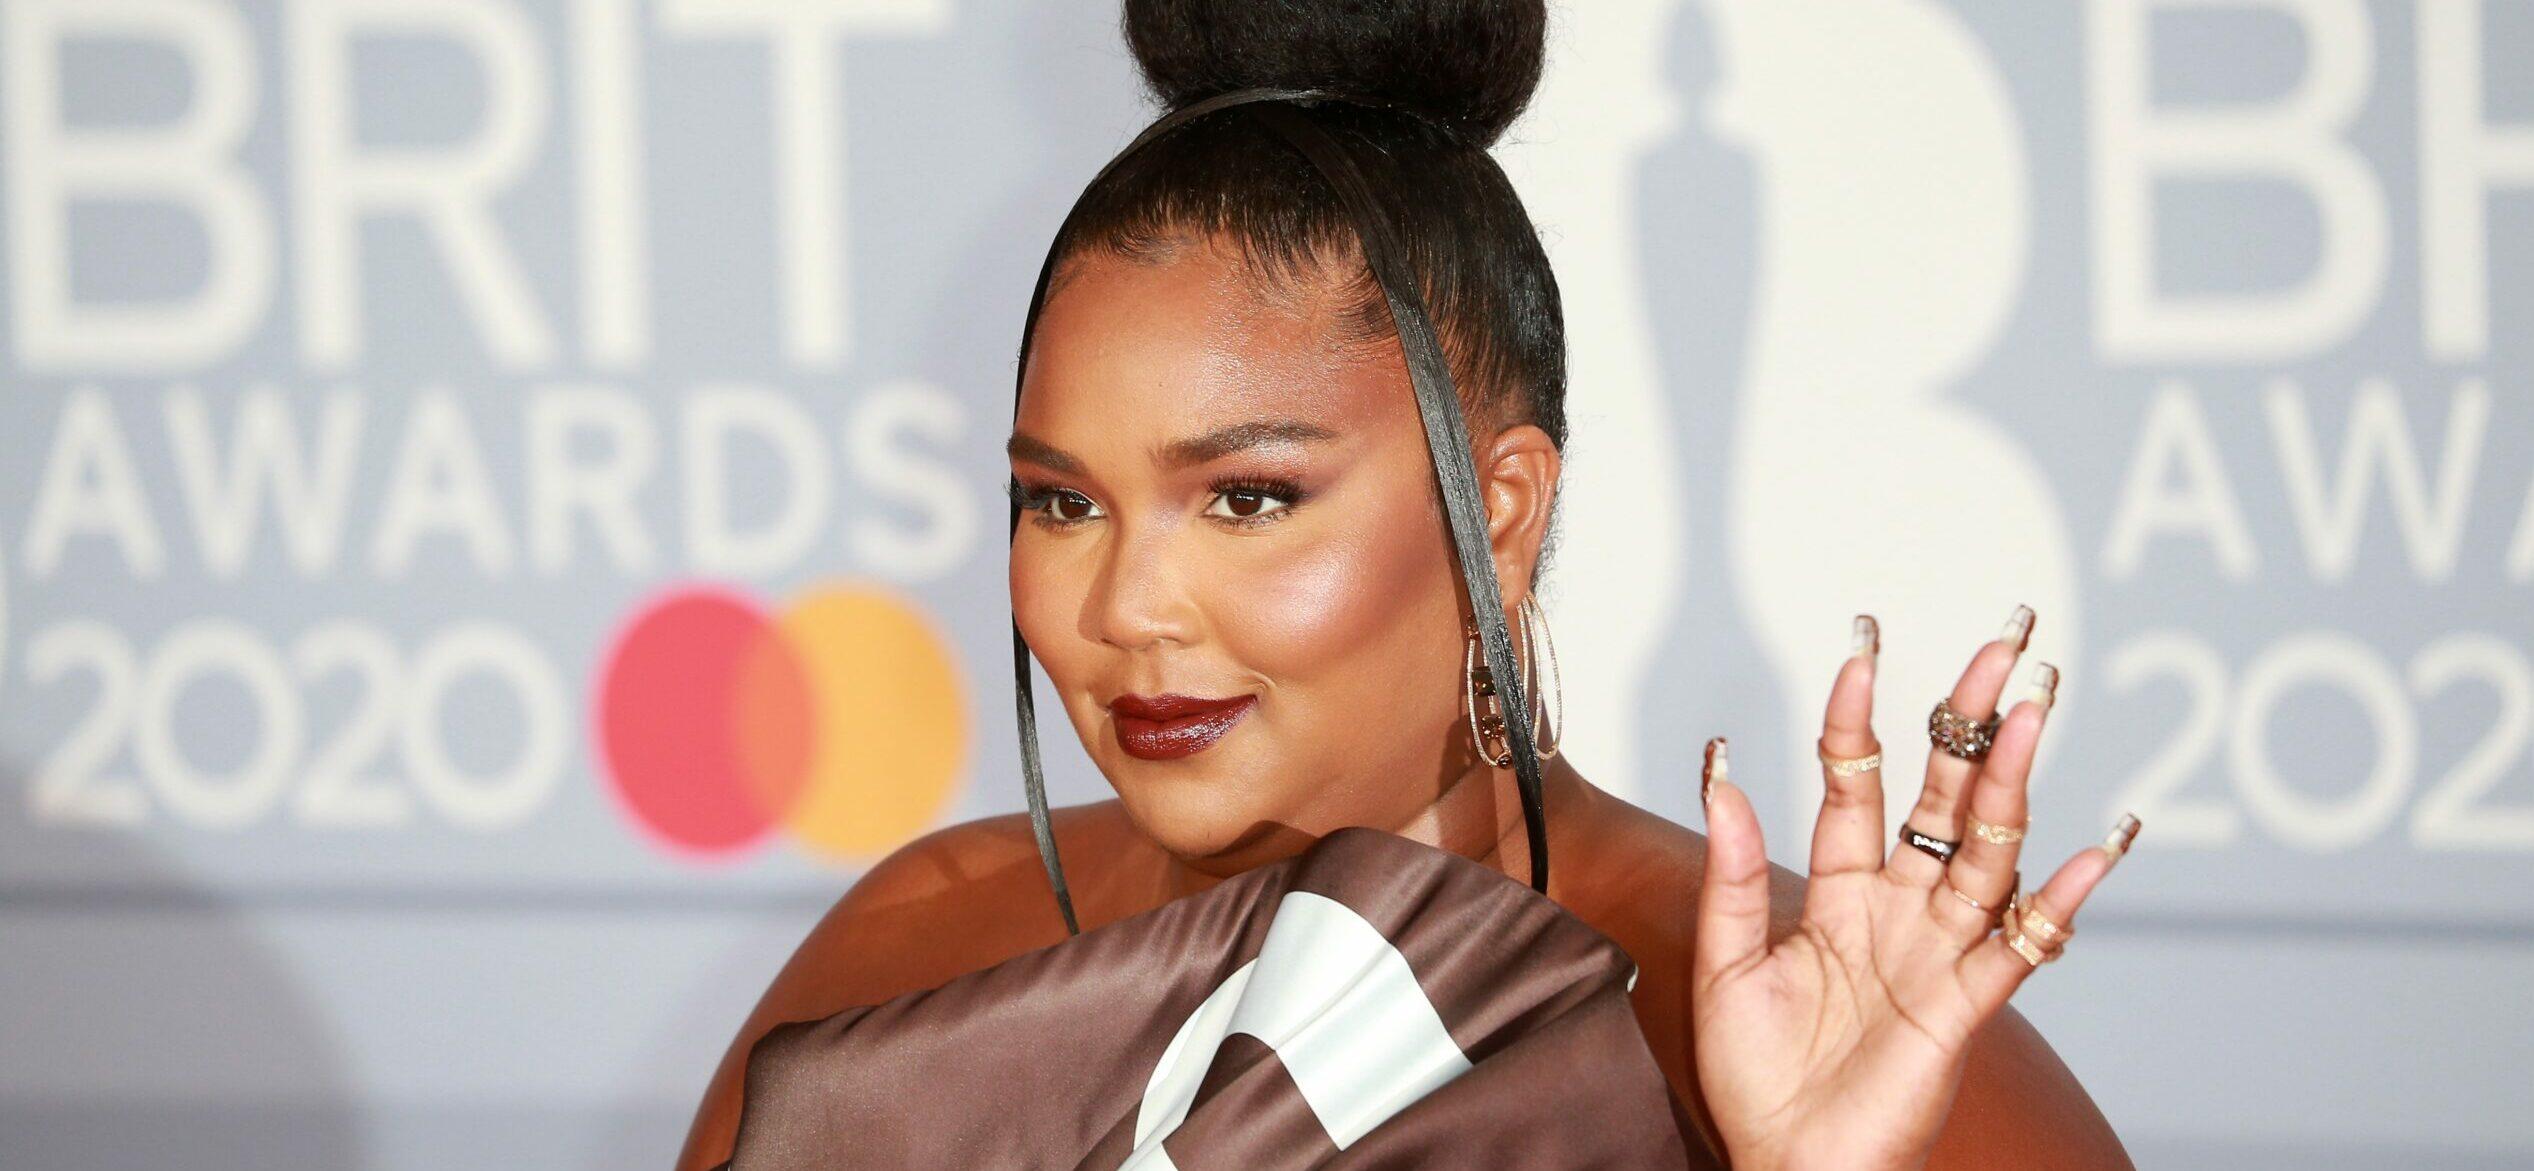 Lizzo Mulls Quitting Music Over Body-Shaming Comment On Twitter: ‘Starting To Make Me Hate The World’